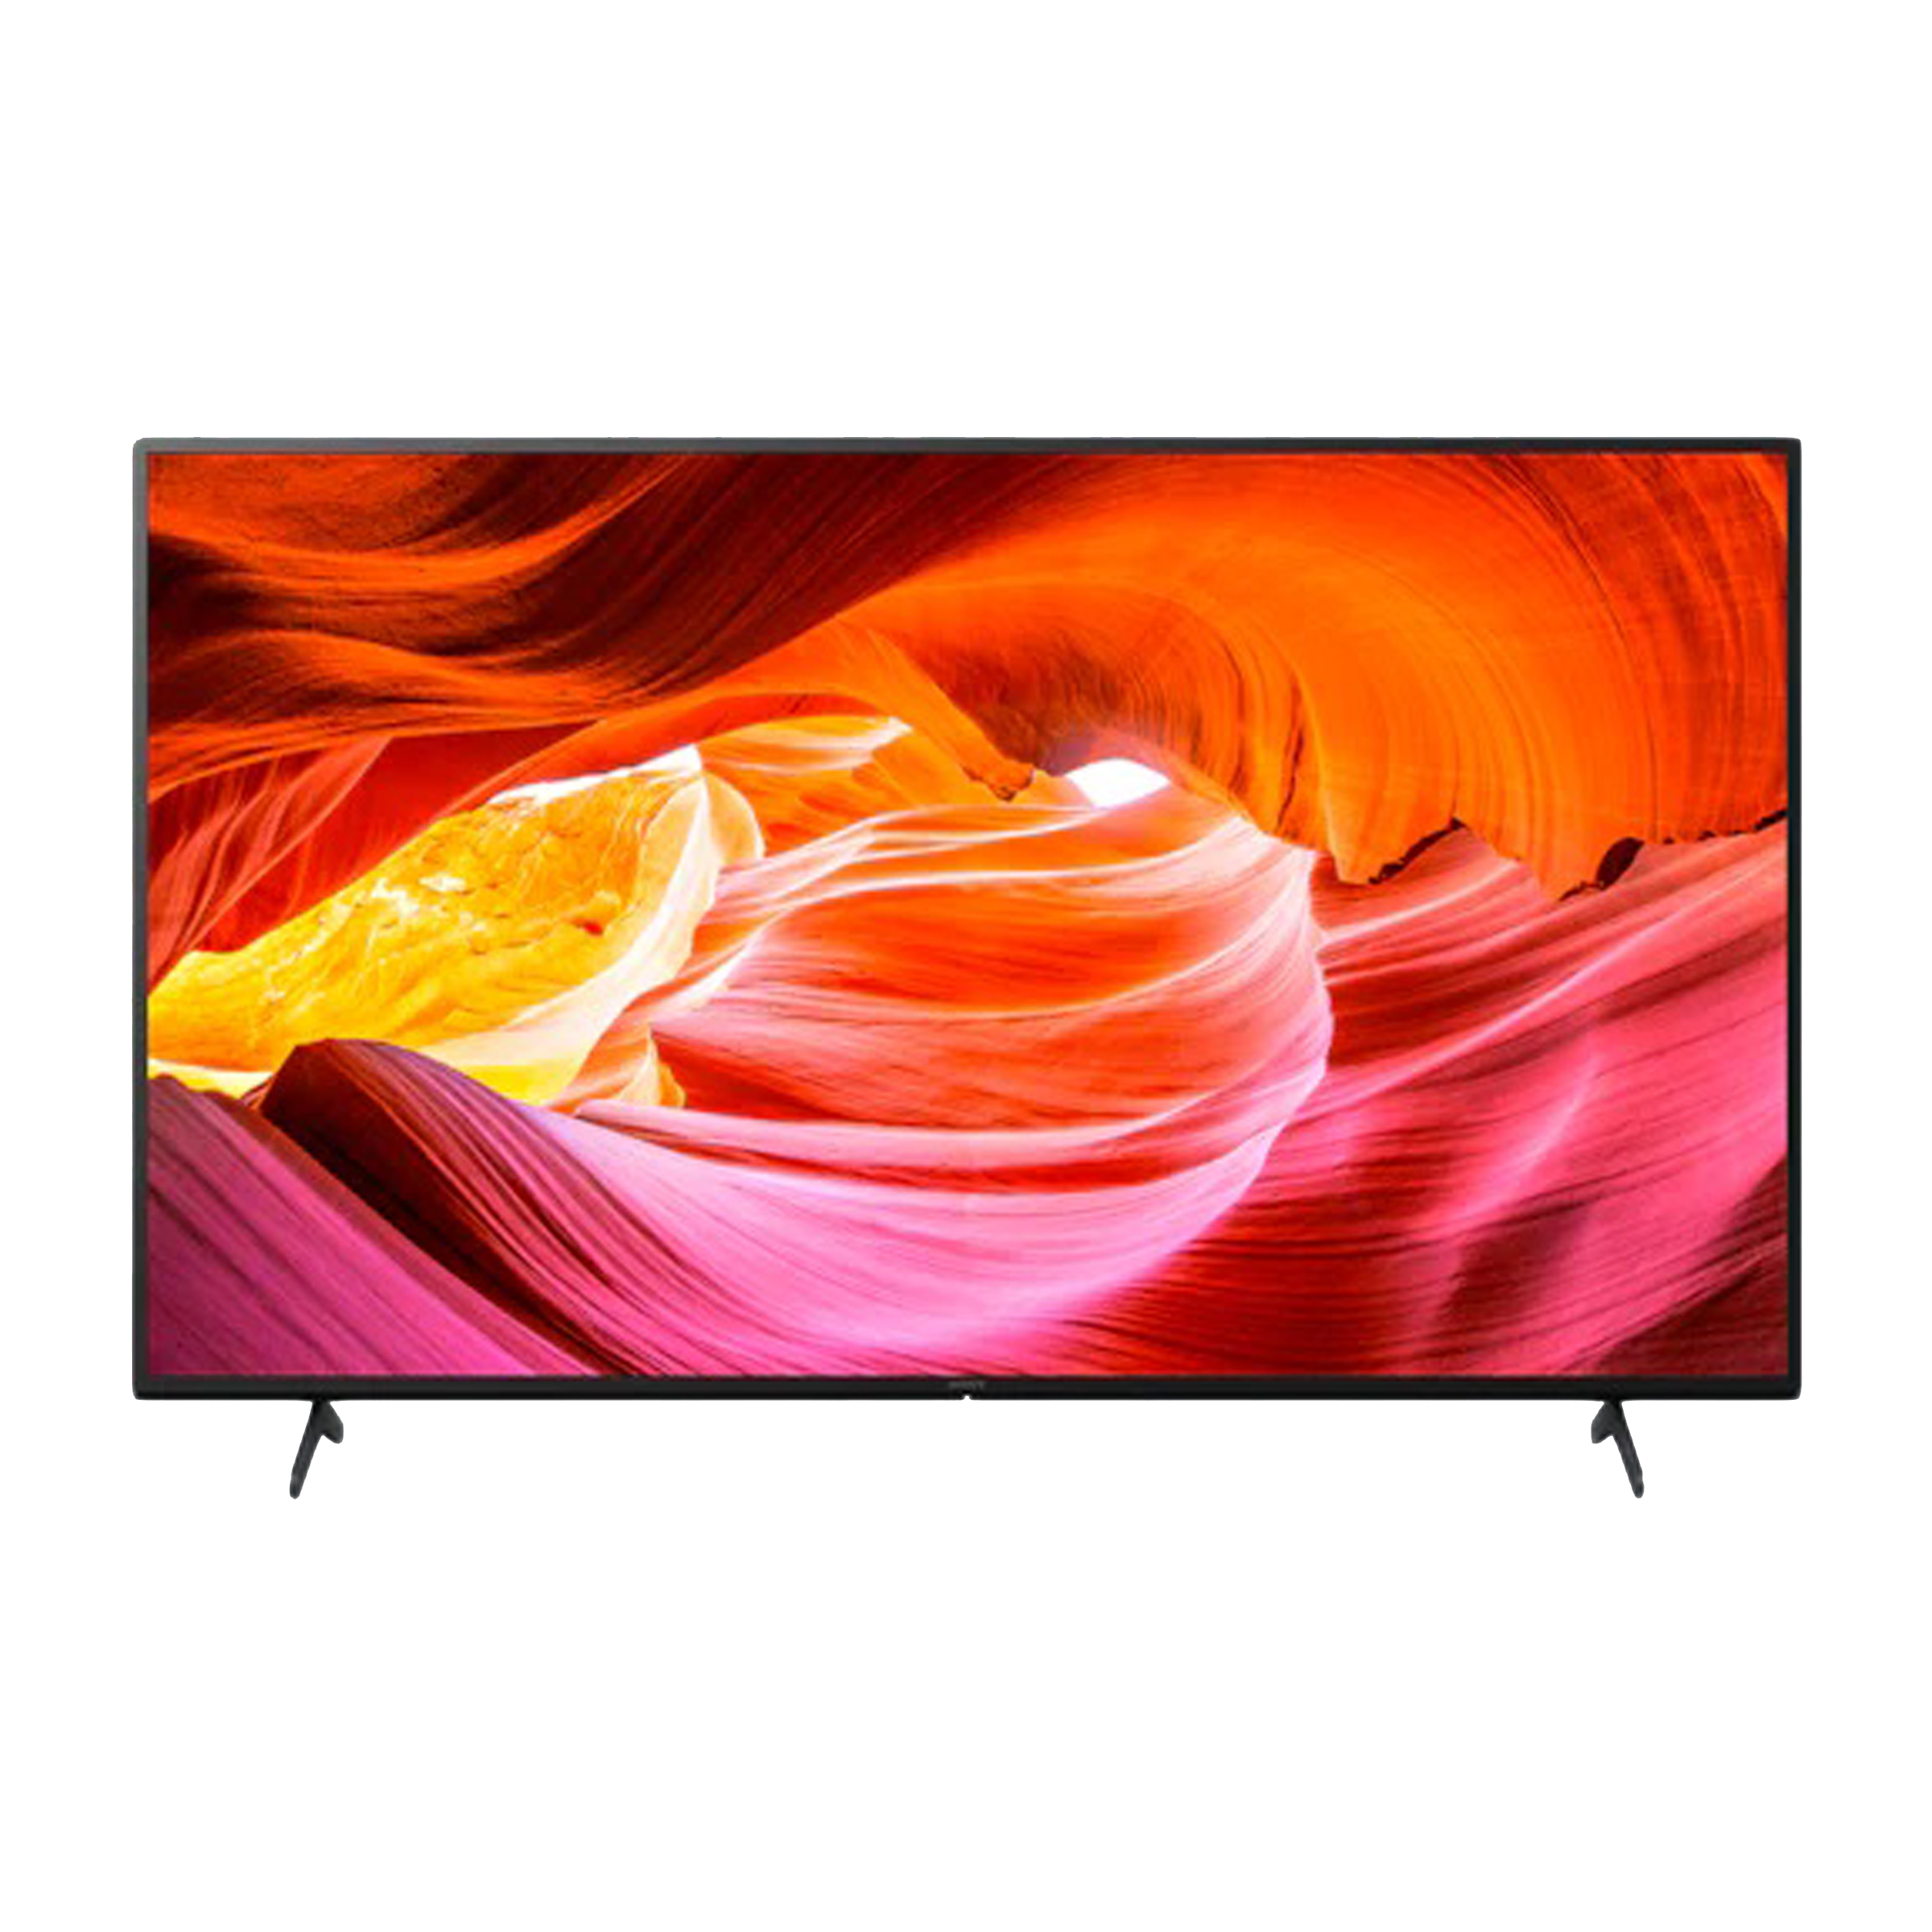 SONY Bravia X75K 108 cm (43 inch) 4K Ultra HD LED Android TV with Alexa Compatibility_1